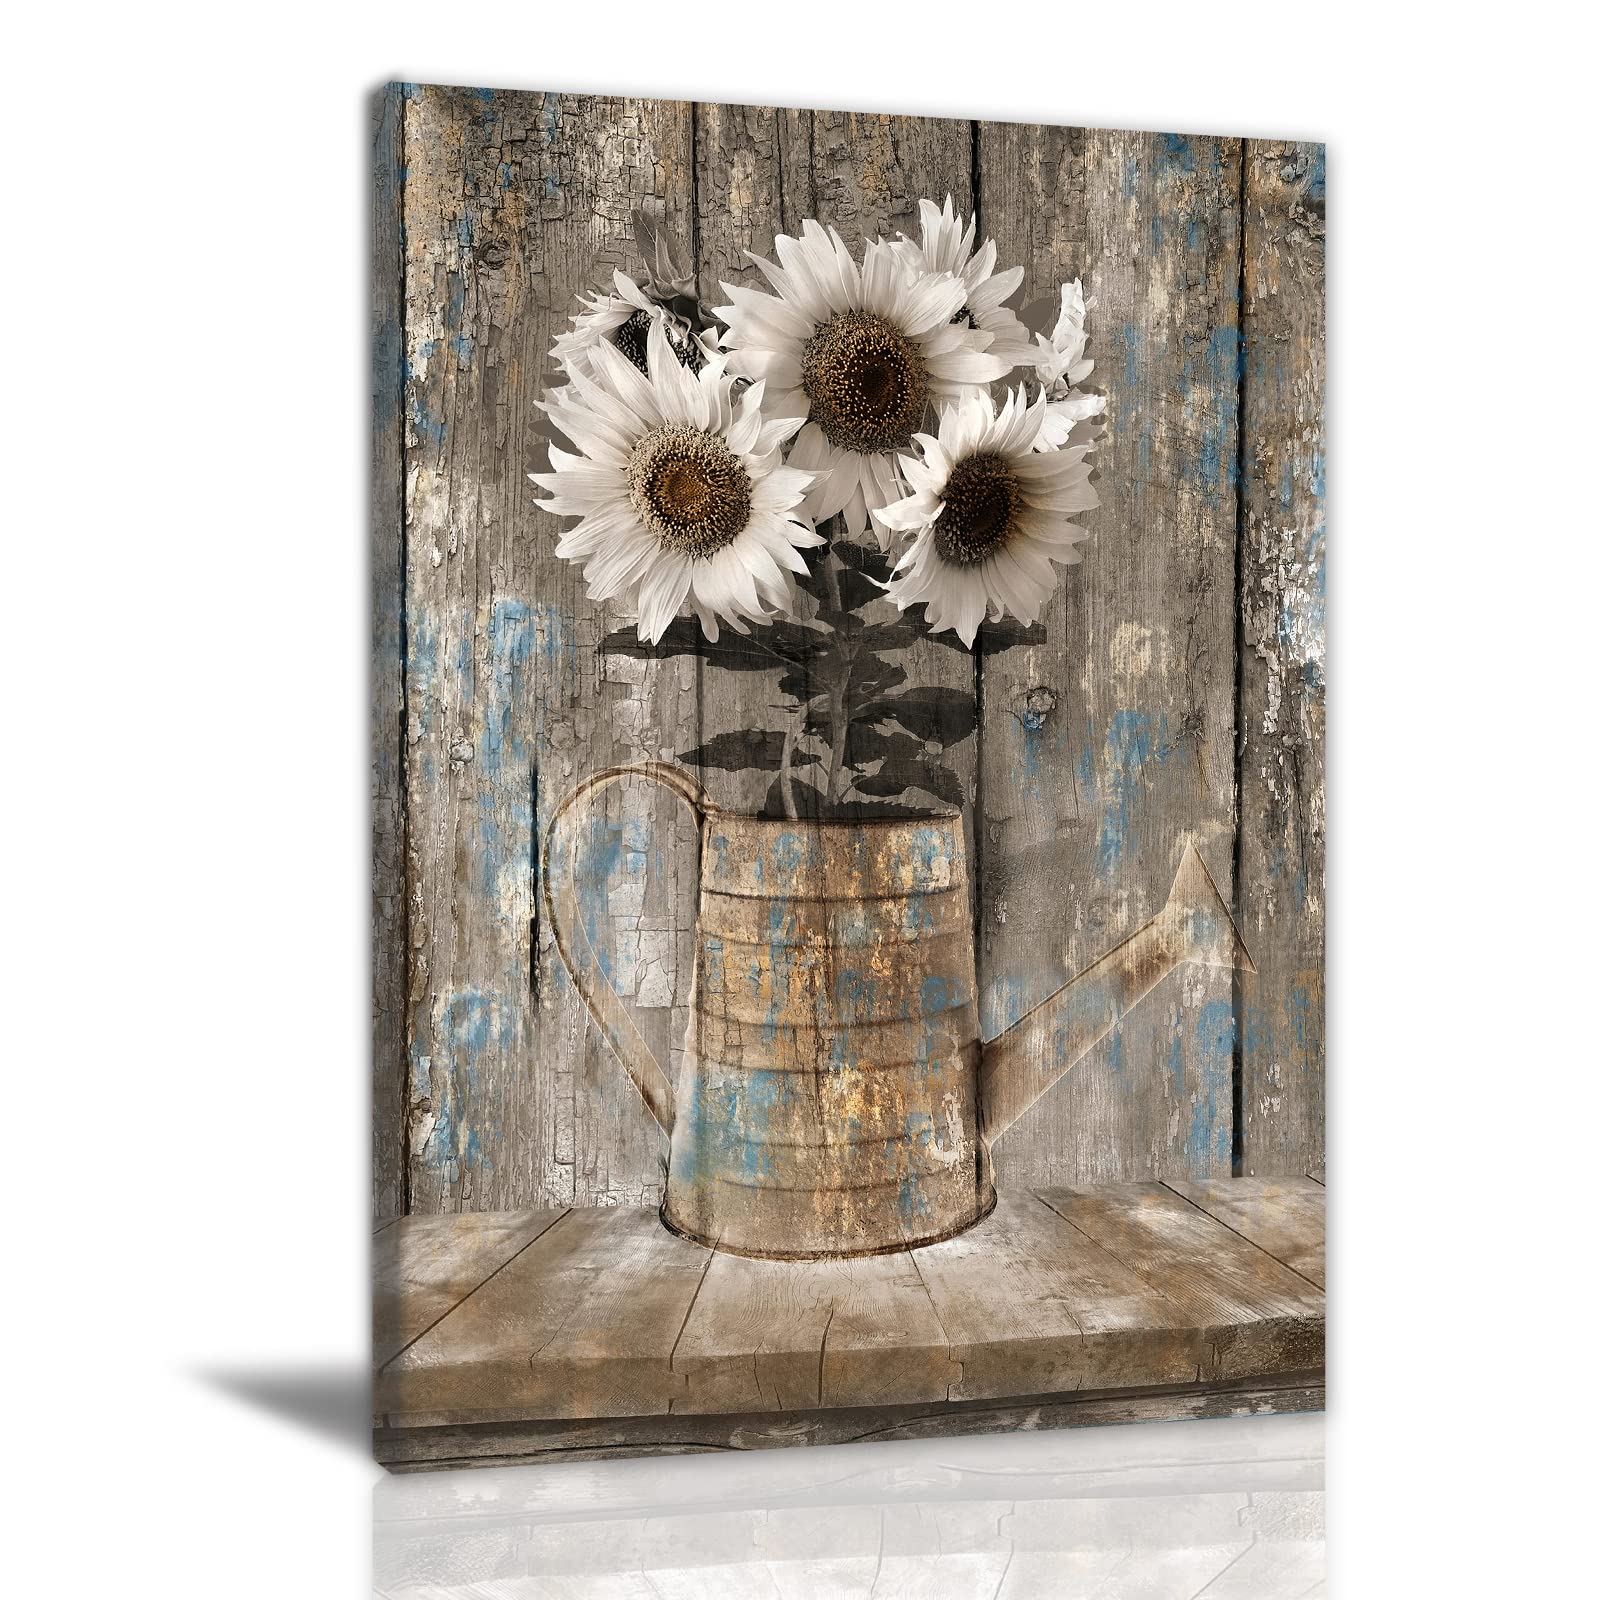 Mua Rustic Farmhouse Sunflowers Wall Art Flowers Painting Country ...